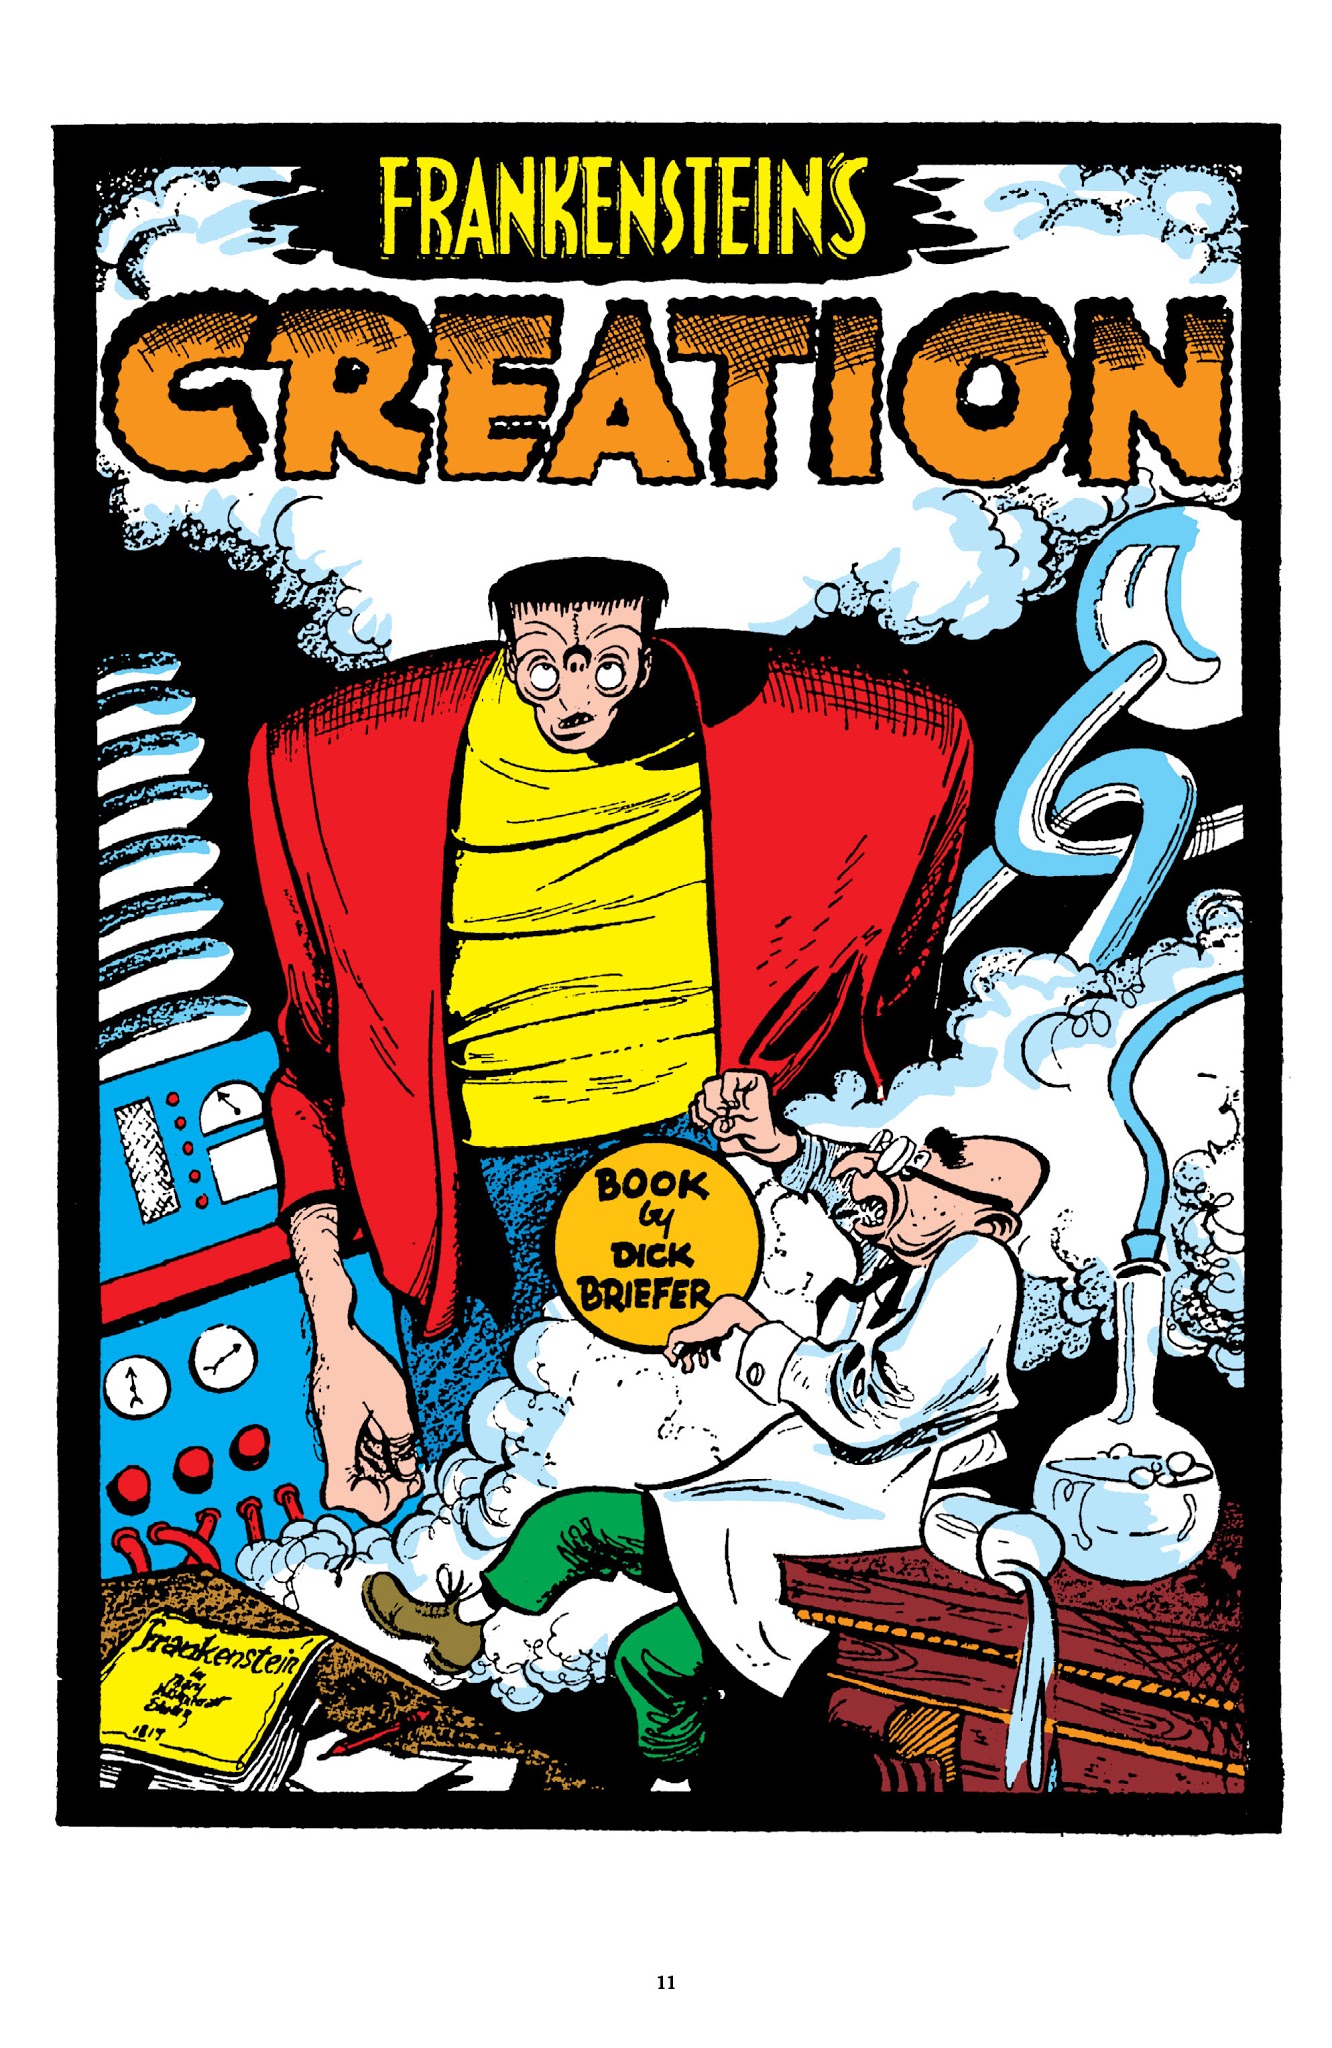 Read online Frankenstein: The Mad Science of Dick Briefer comic -  Issue # TPB - 12